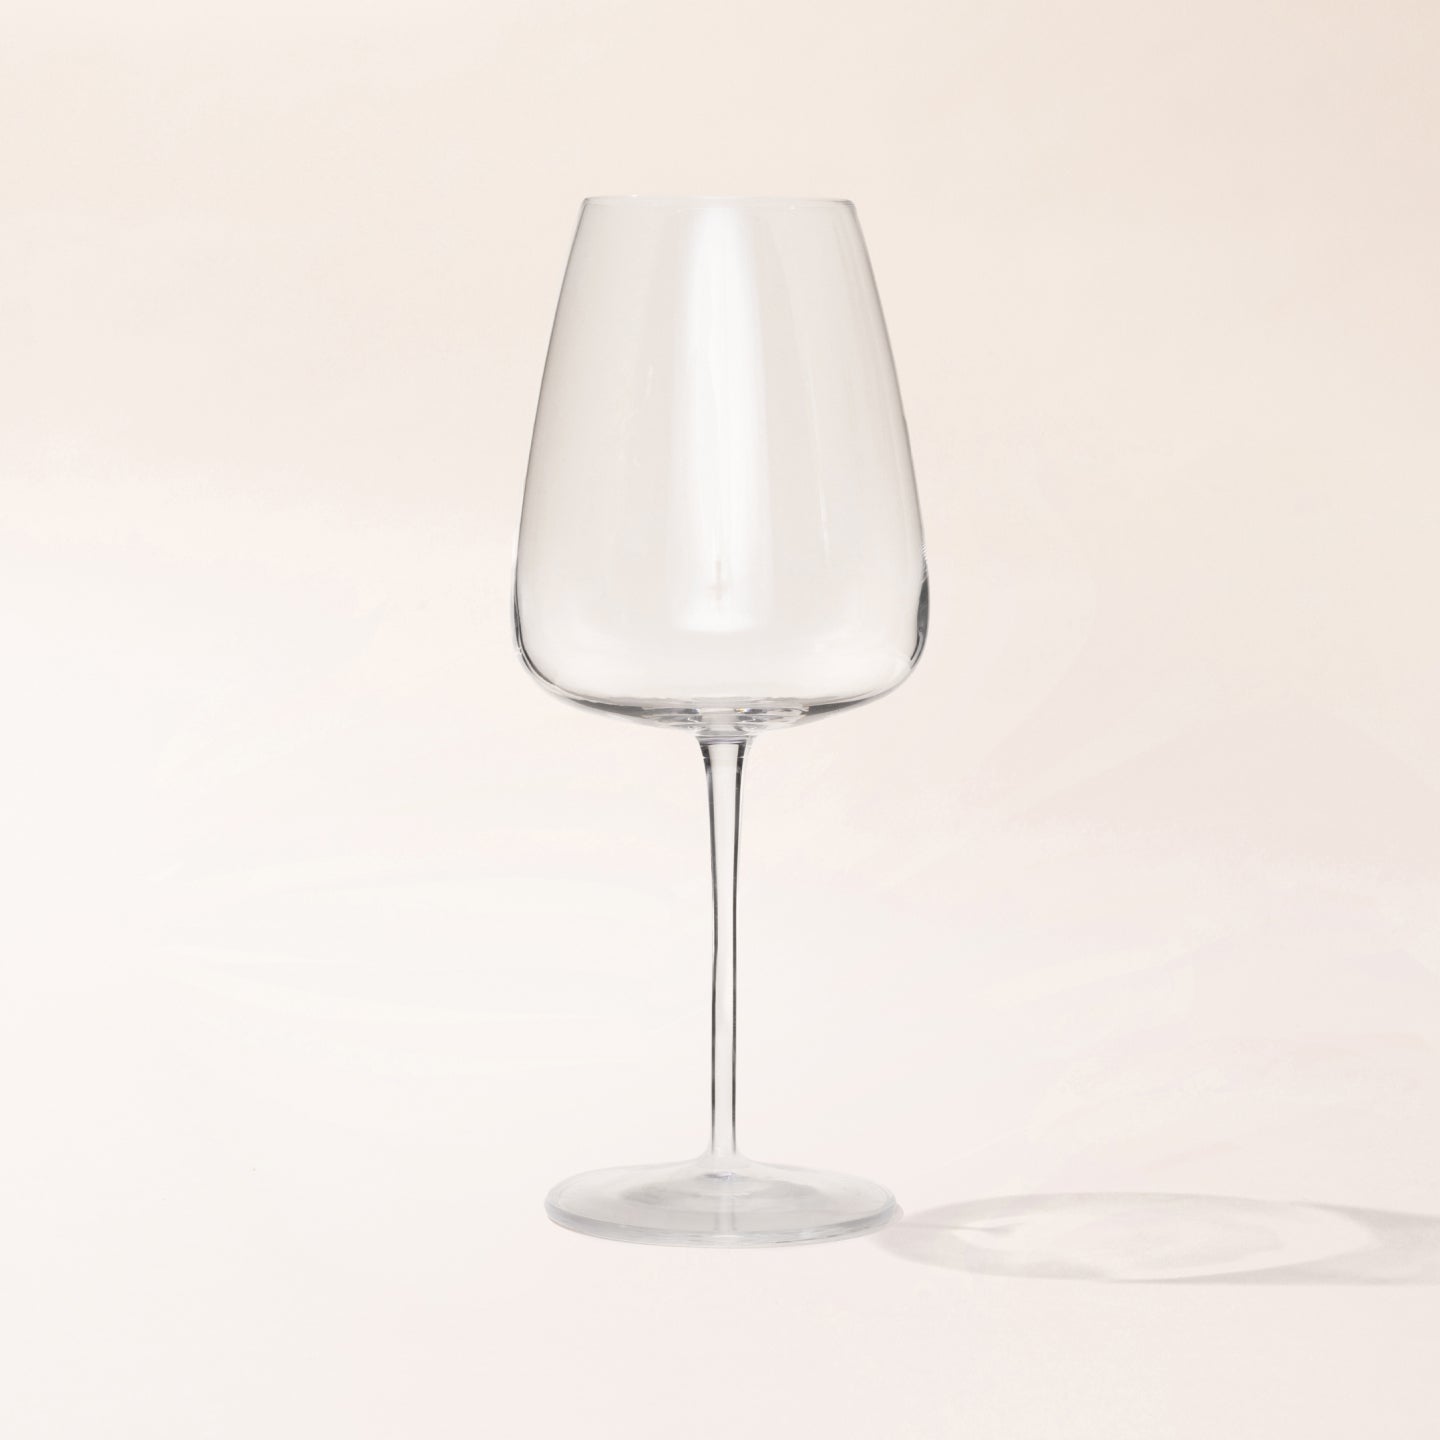 14 types of drinking glasses that you must have in your kitchen